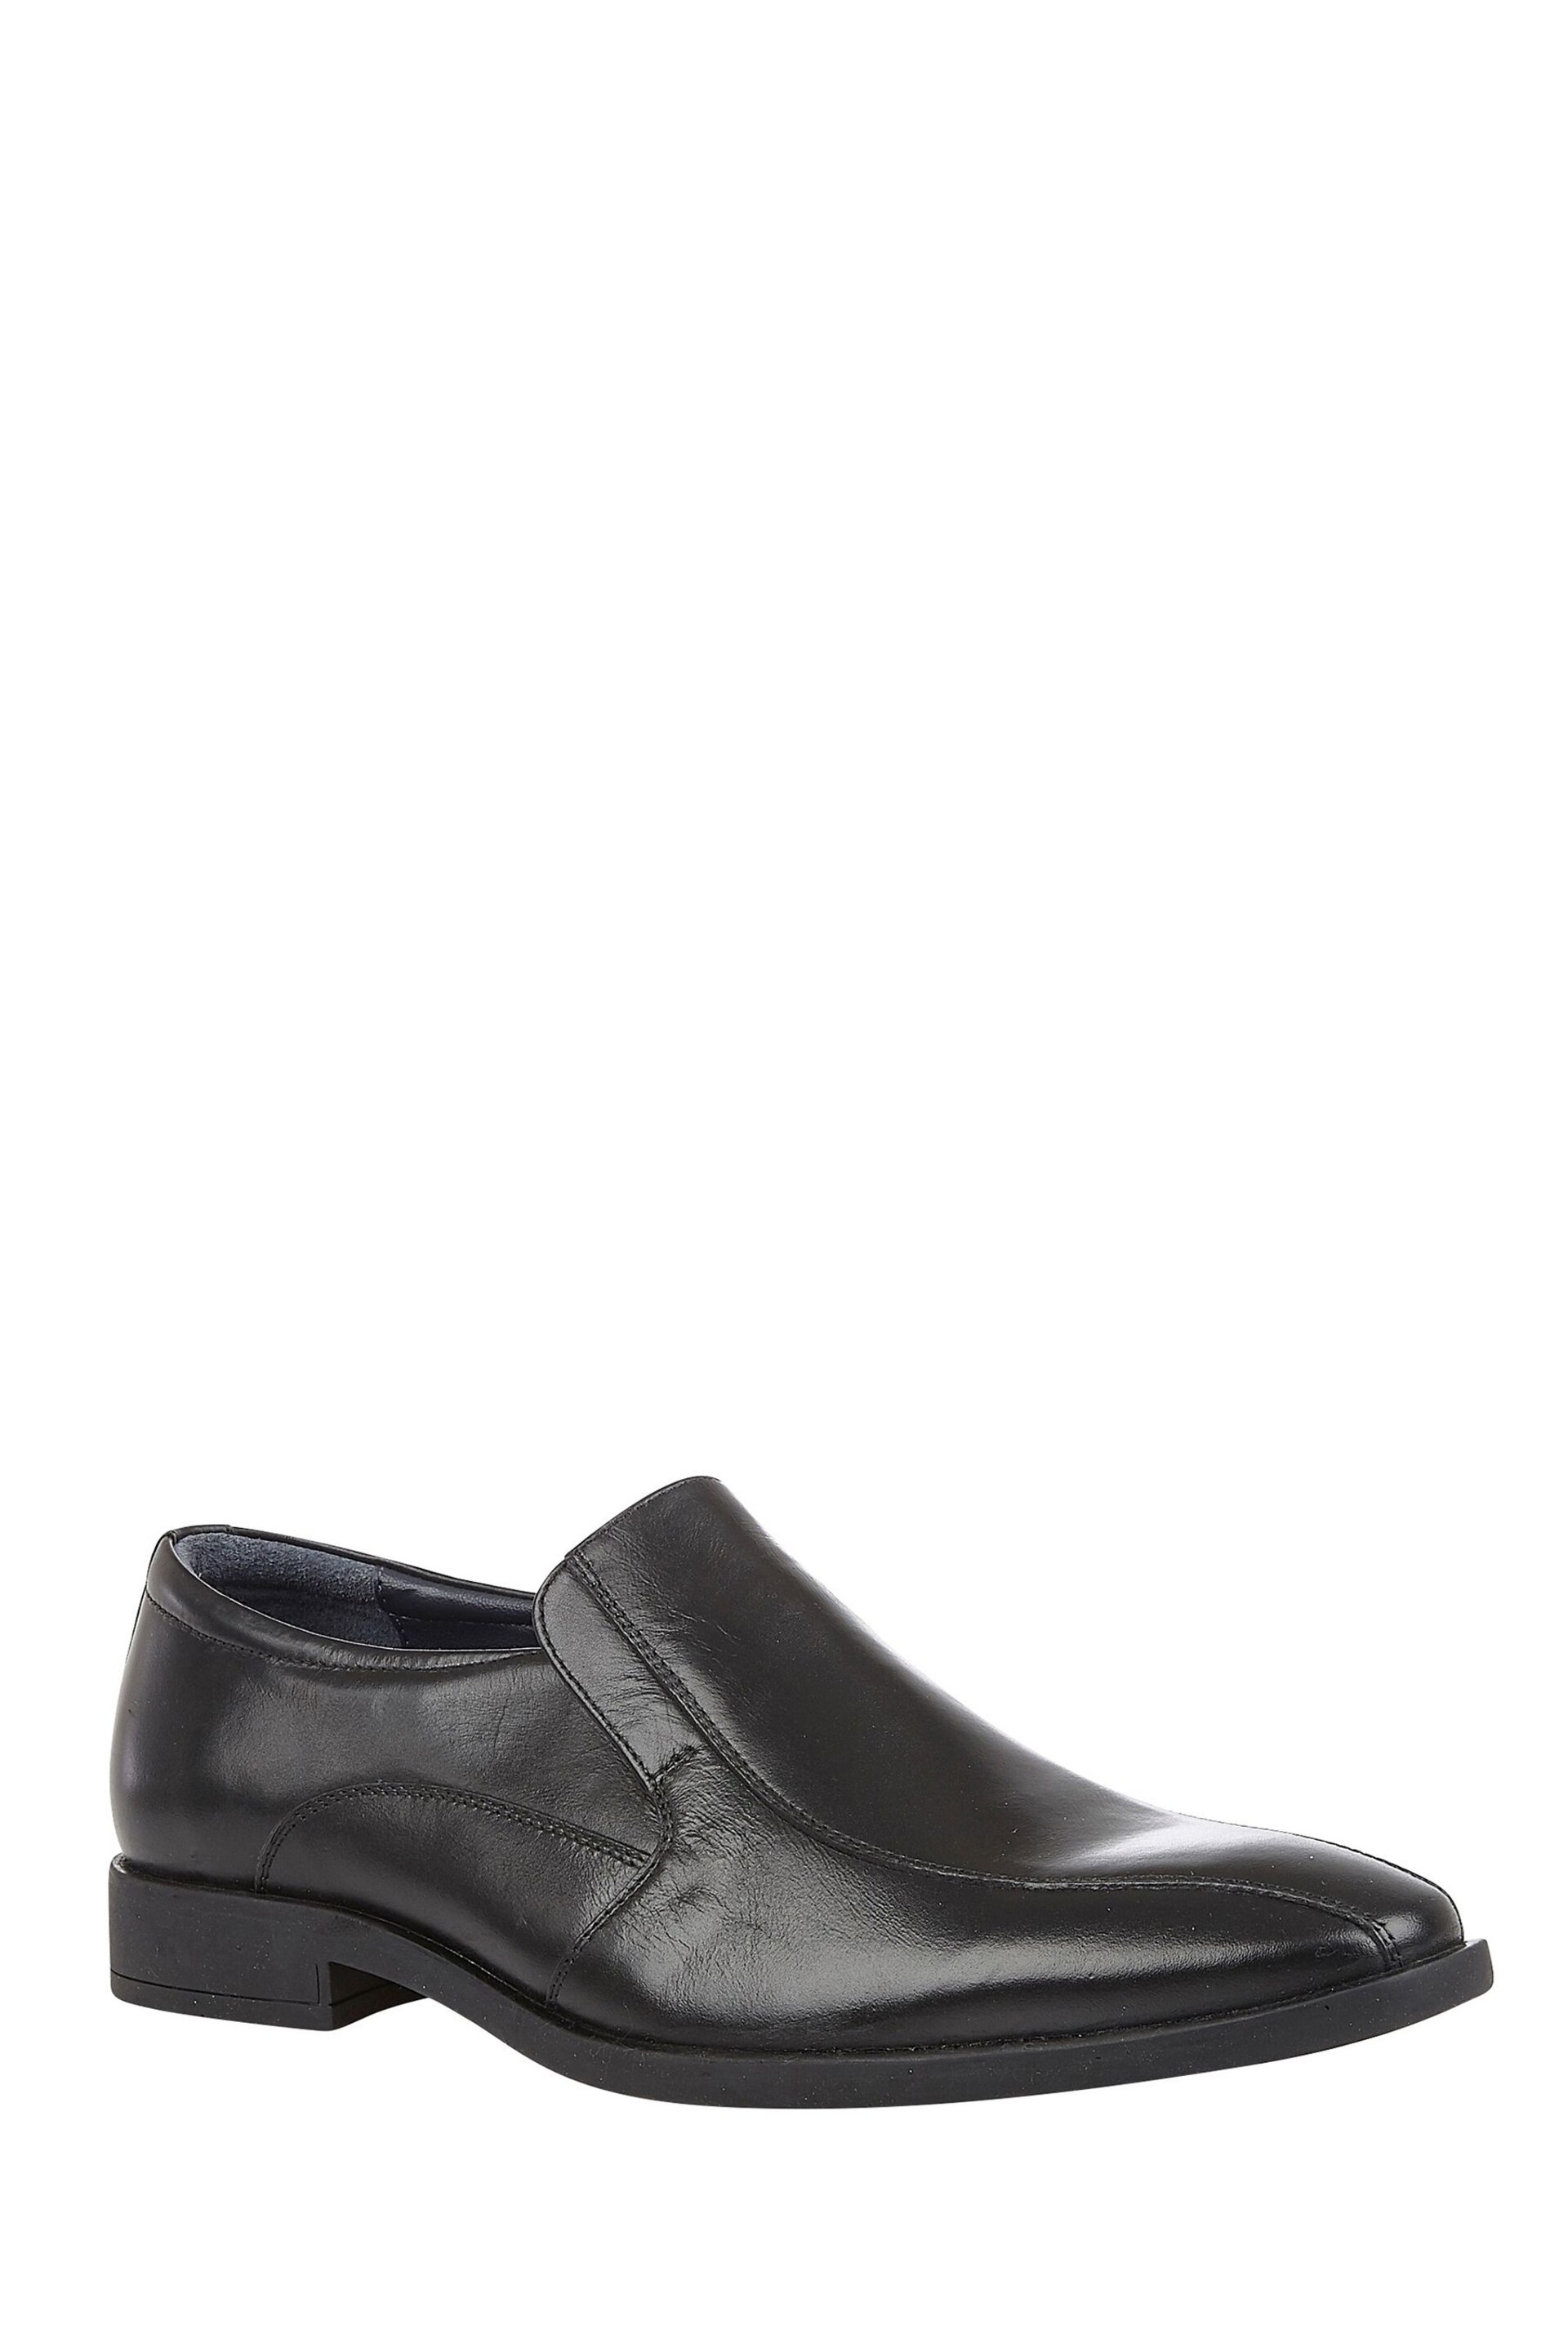 Lotus Black Leather Loafers - Image 2 of 5